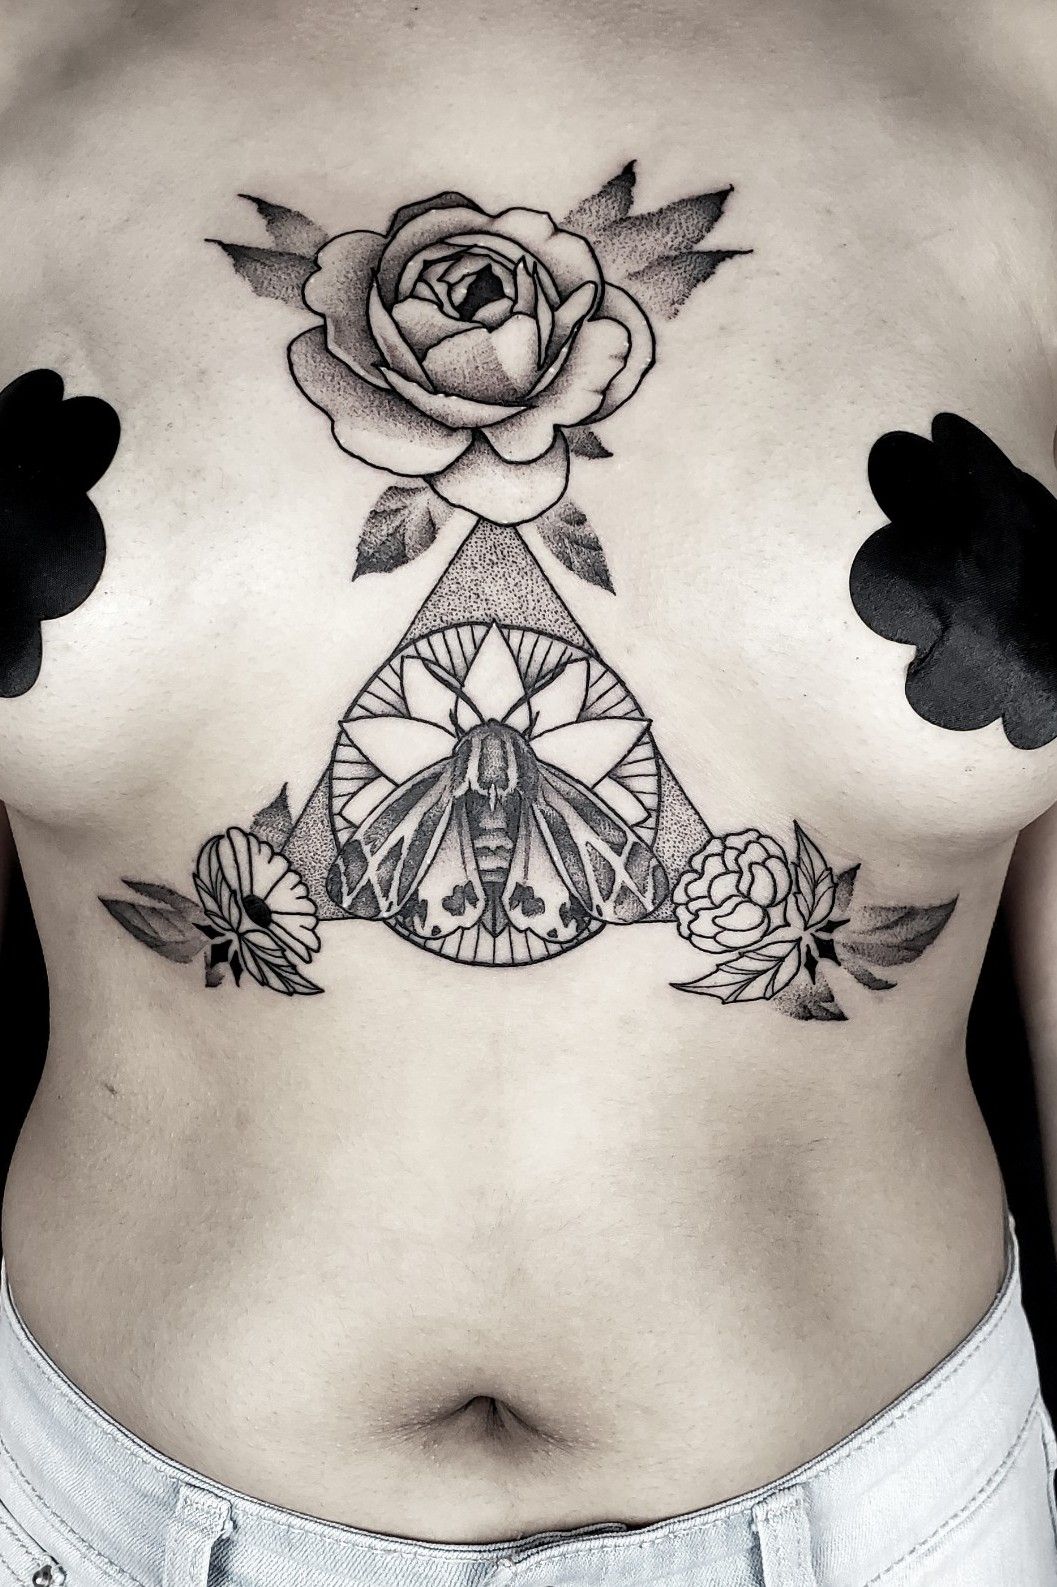 Tattoo uploaded by V • Sternum-underboob-chest piece We're doing